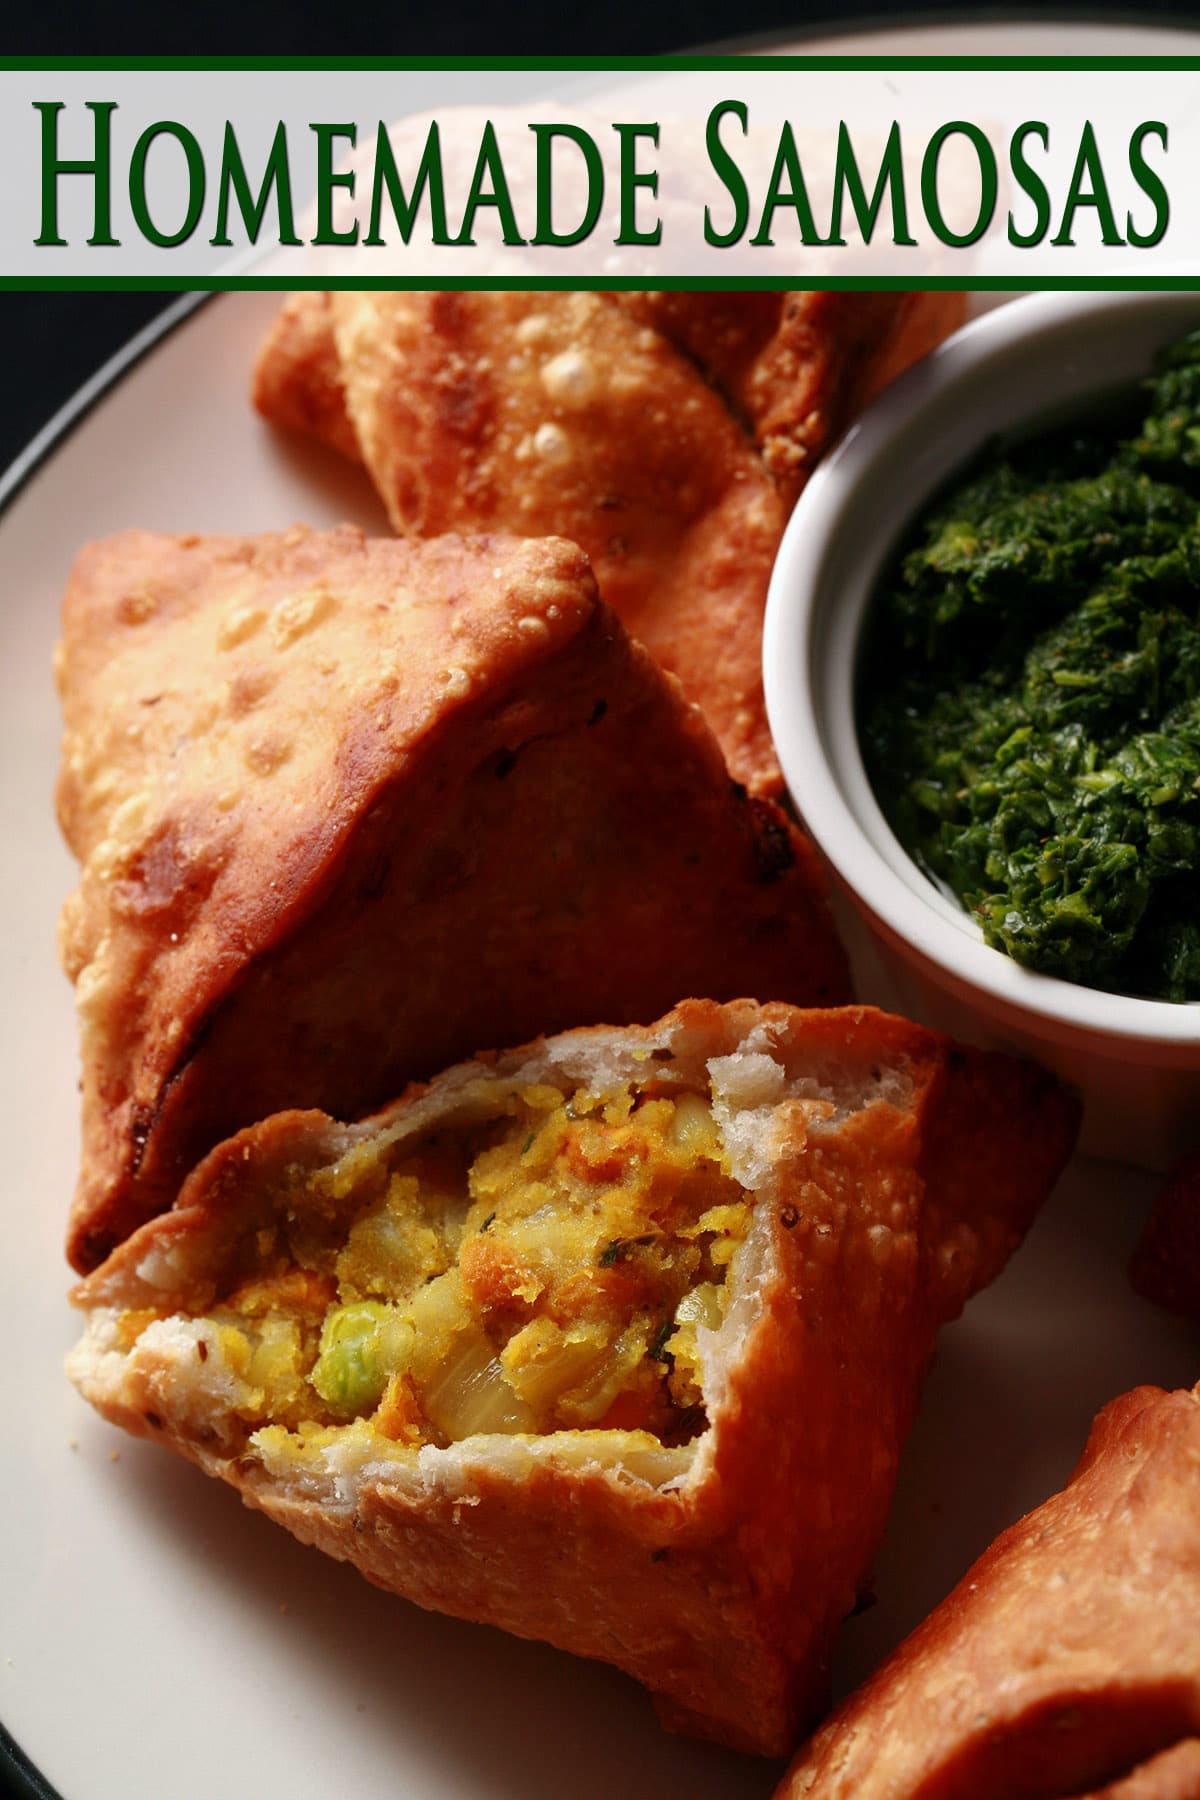 A plate of homemade samosas, with a small bowl of cilantro mint chutney.